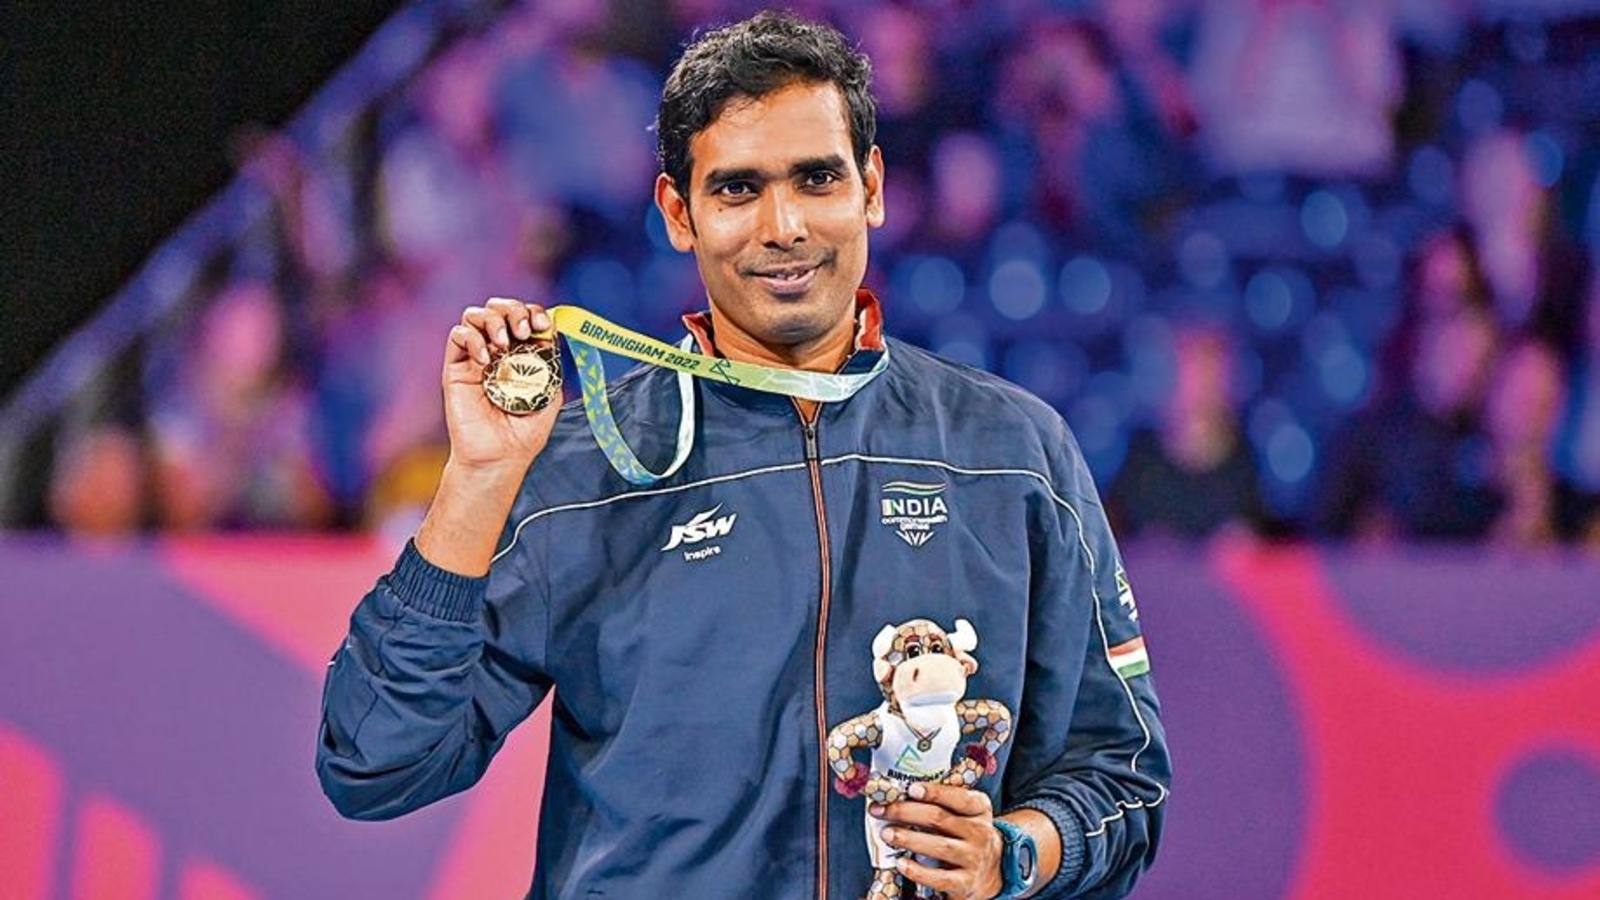 sharath-recommended-for-khel-ratna-sable-among-arjuna-nominees